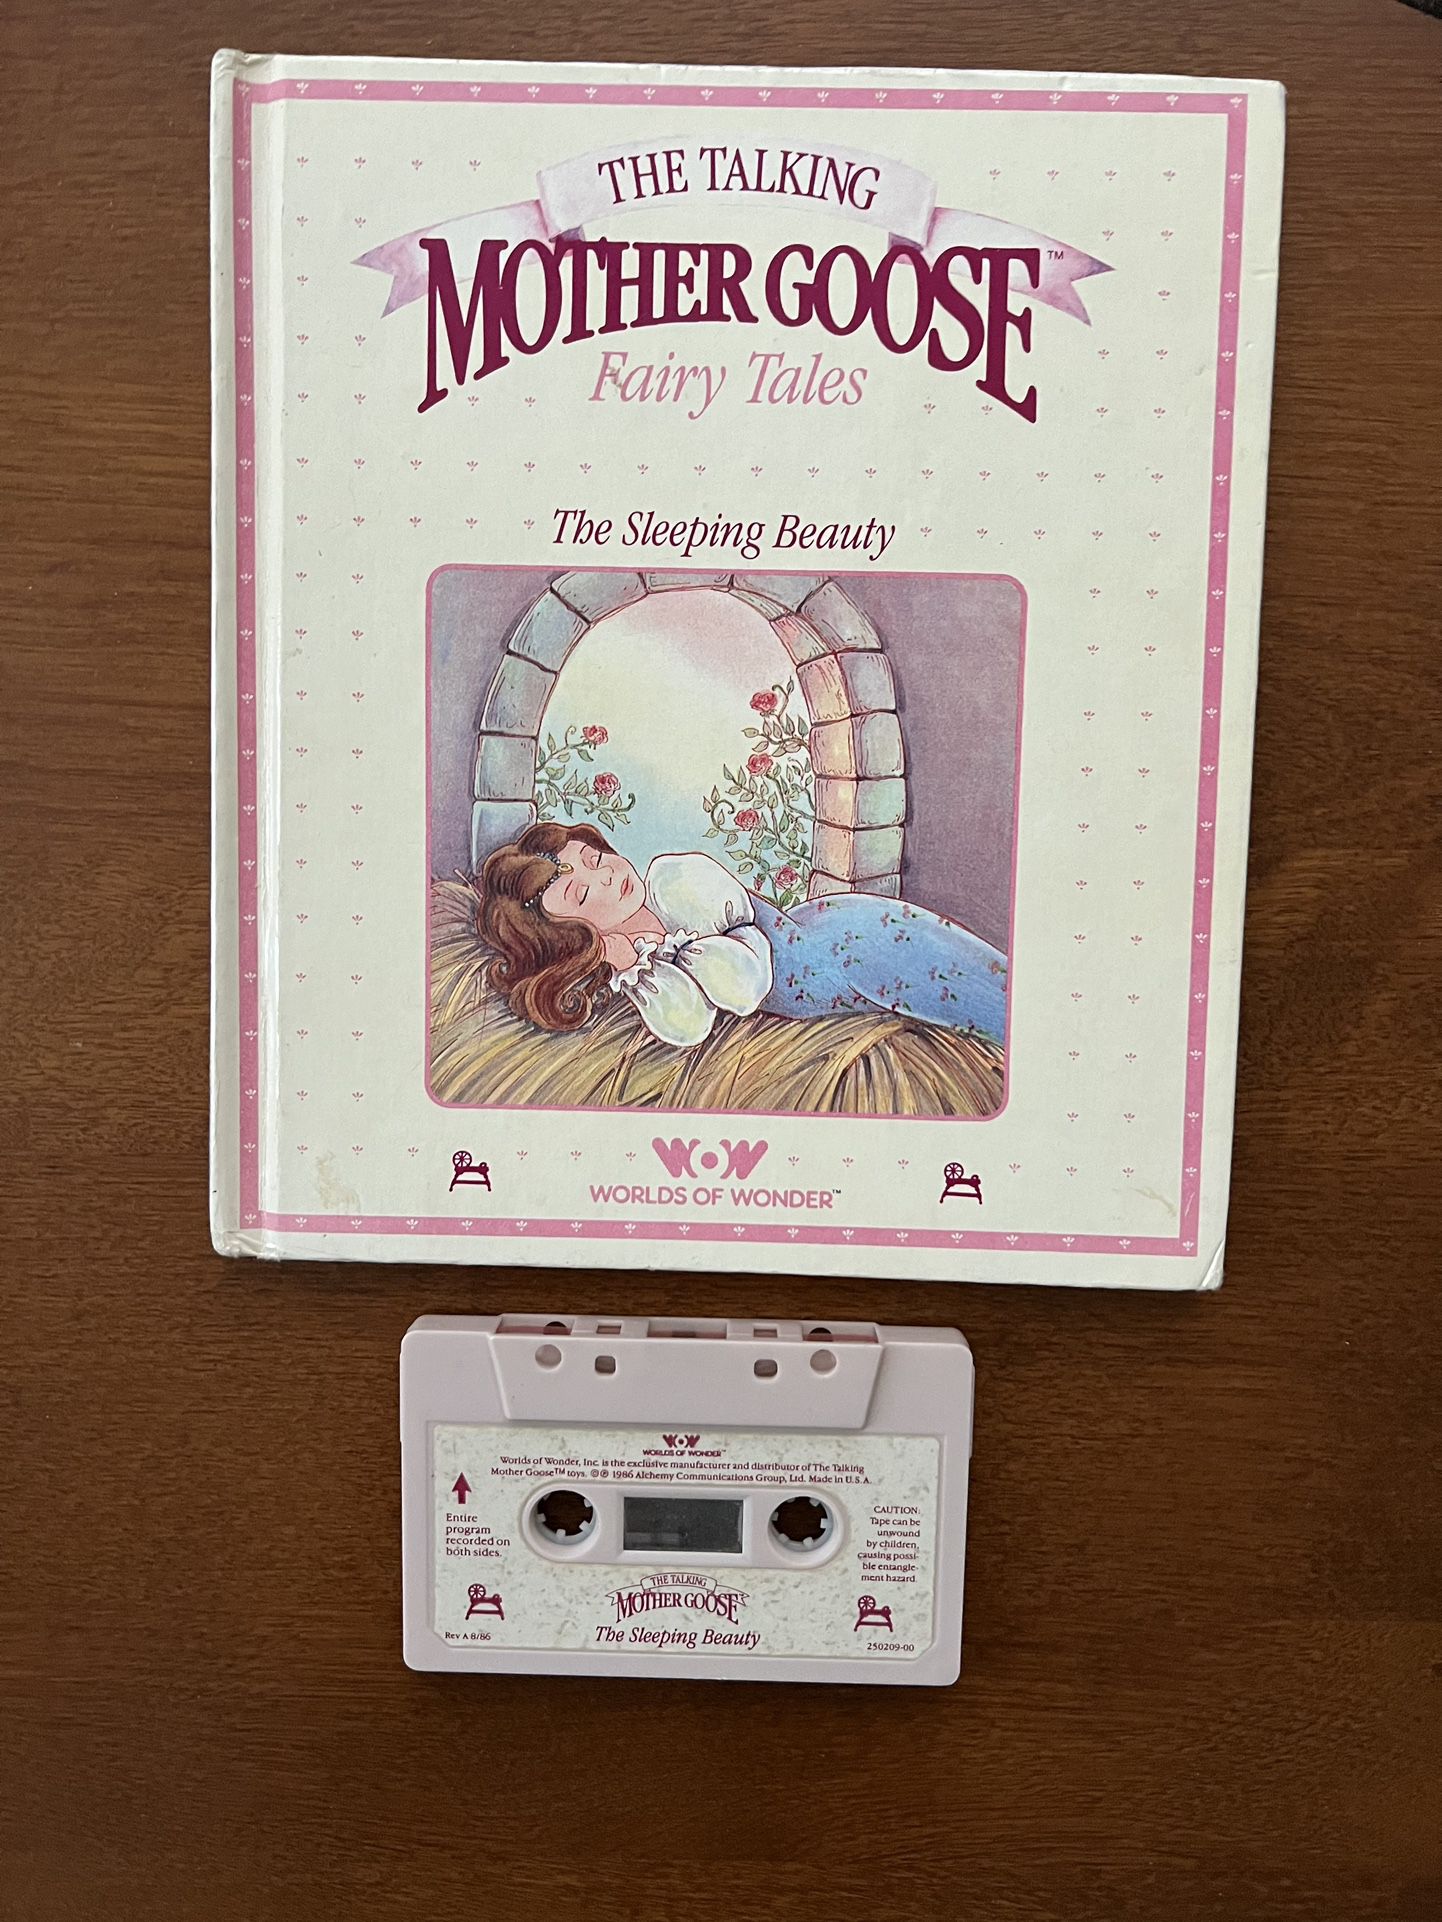 Worlds of Wonder, Talking Mother Goose The Sleeping Beauty Book & Cassette Tape  You will receive the book and cassette tape. Tape has not been tested